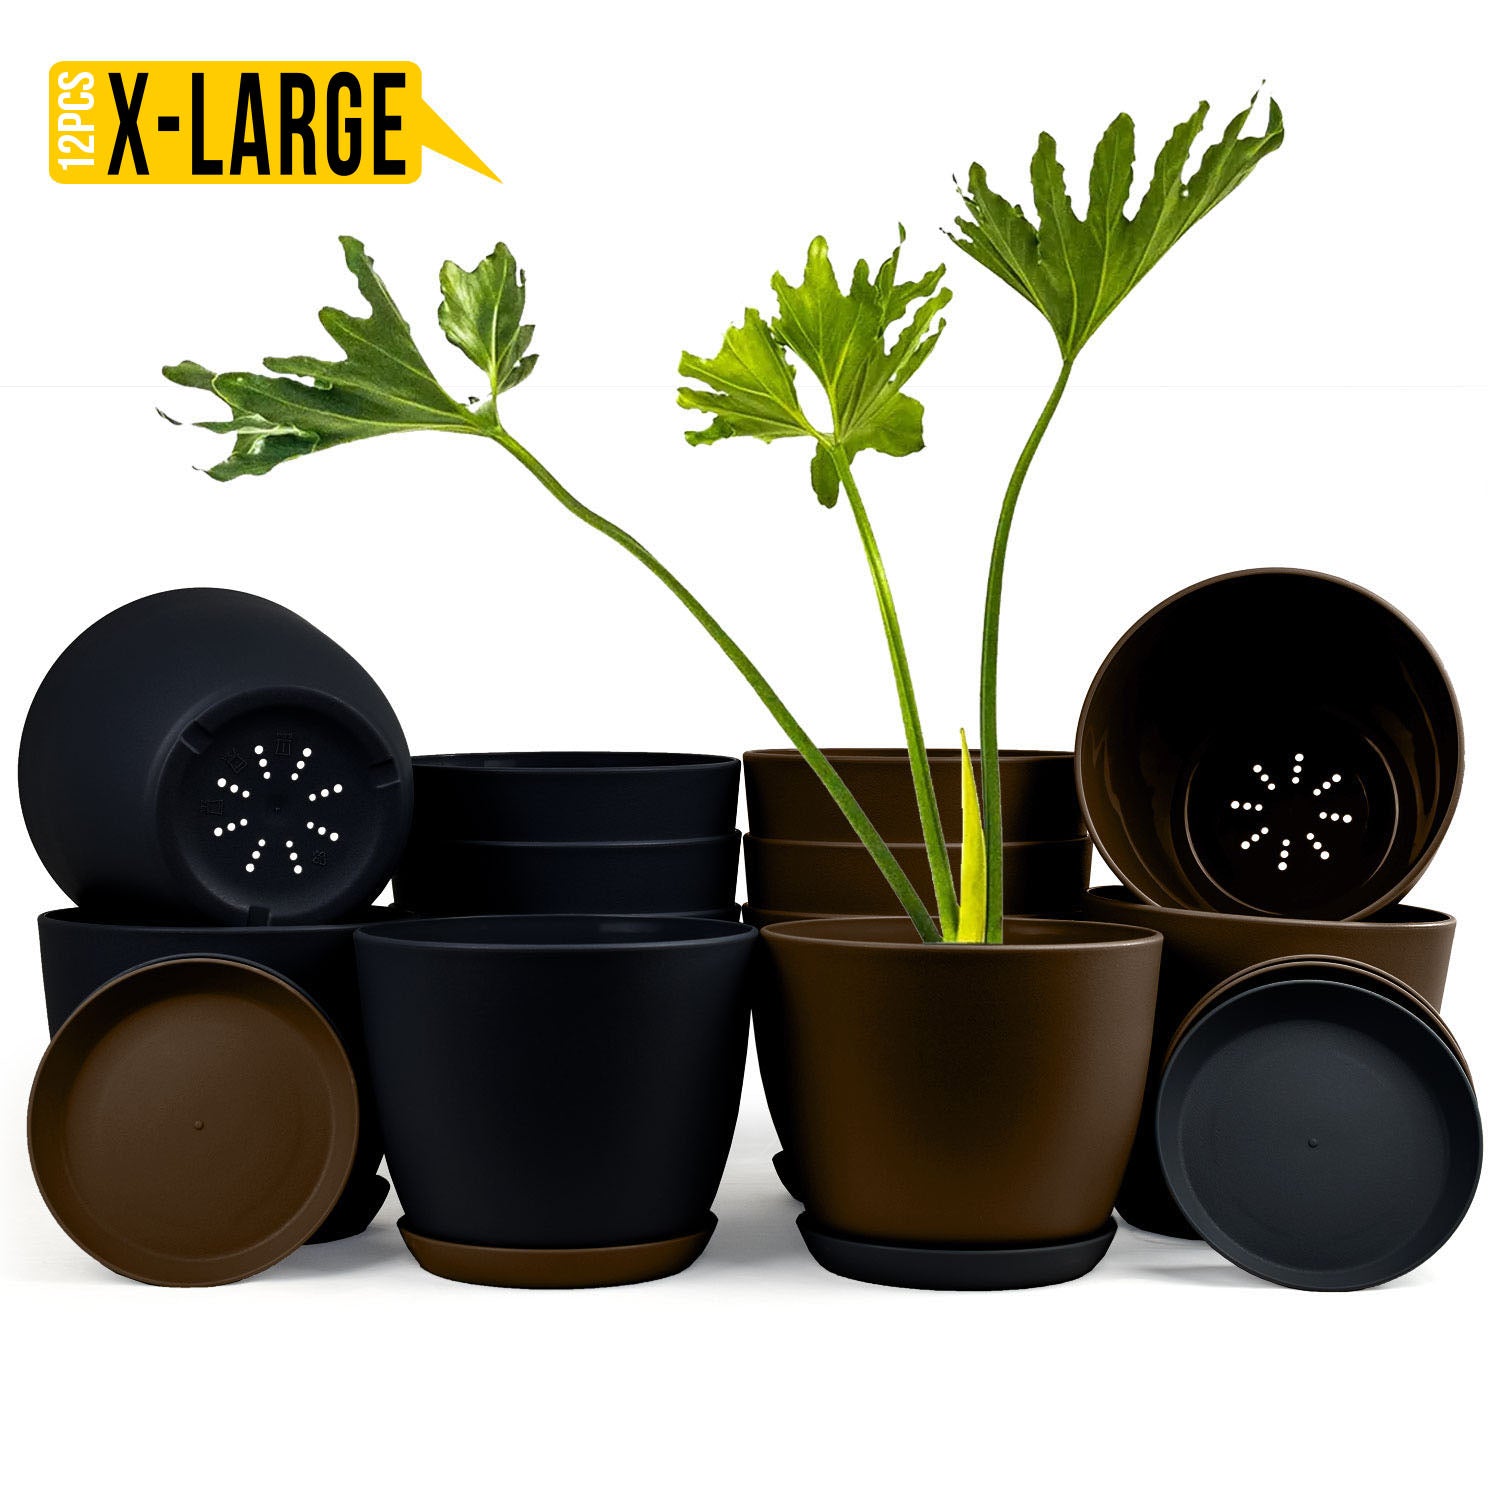 Elevate Your Space with Fast Forward Extra Large Plant Pots: Two Vibrant Colors, Drainage, Perfect for Indoor Planters - Explore Multi-Packs for Plastic Planters, Cactus, and Succulents Decor Fast Forward